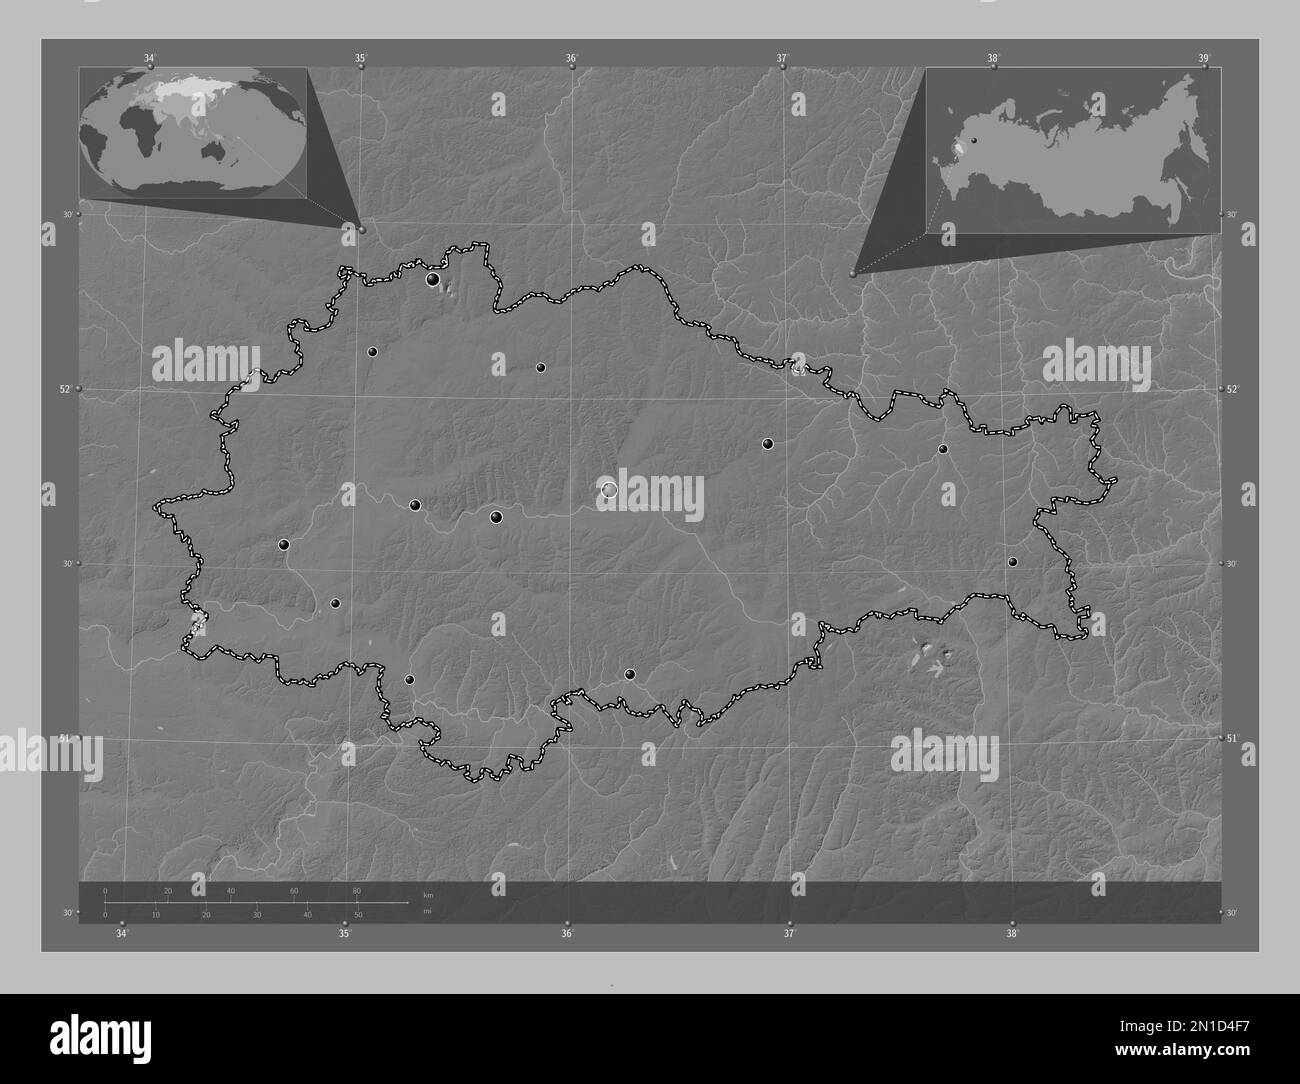 Kursk, region of Russia. Grayscale elevation map with lakes and rivers. Locations of major cities of the region. Corner auxiliary location maps Stock Photo